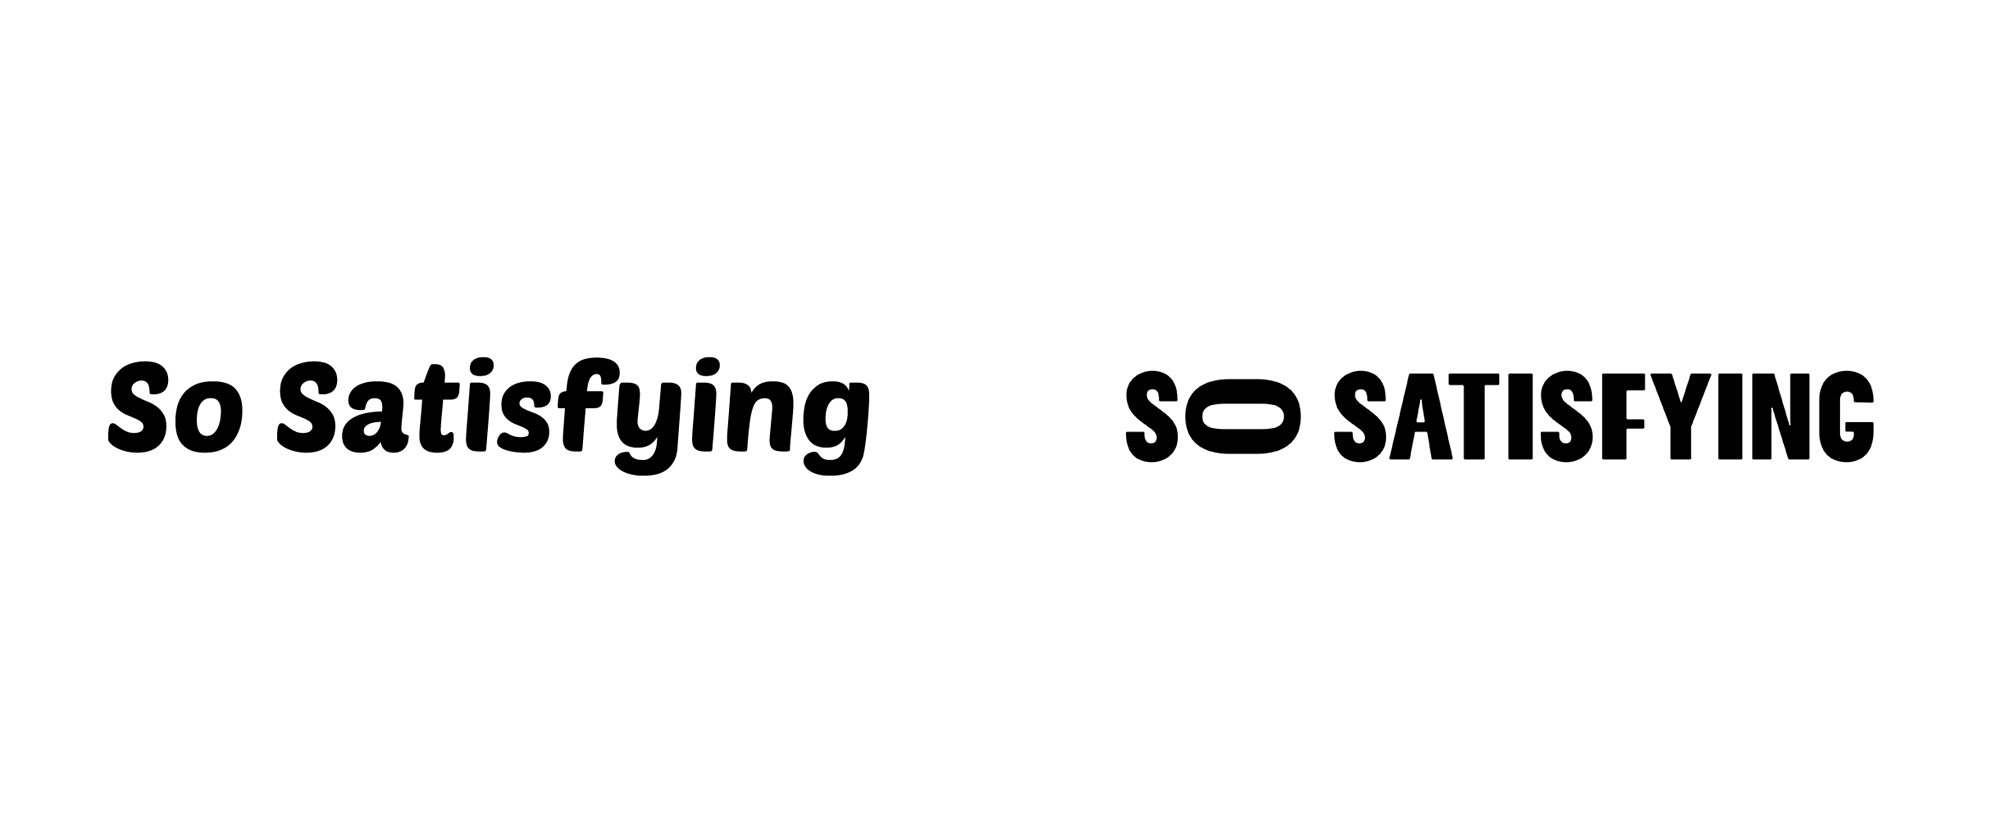 New Logo and Identity for So Satisfying by Vault49